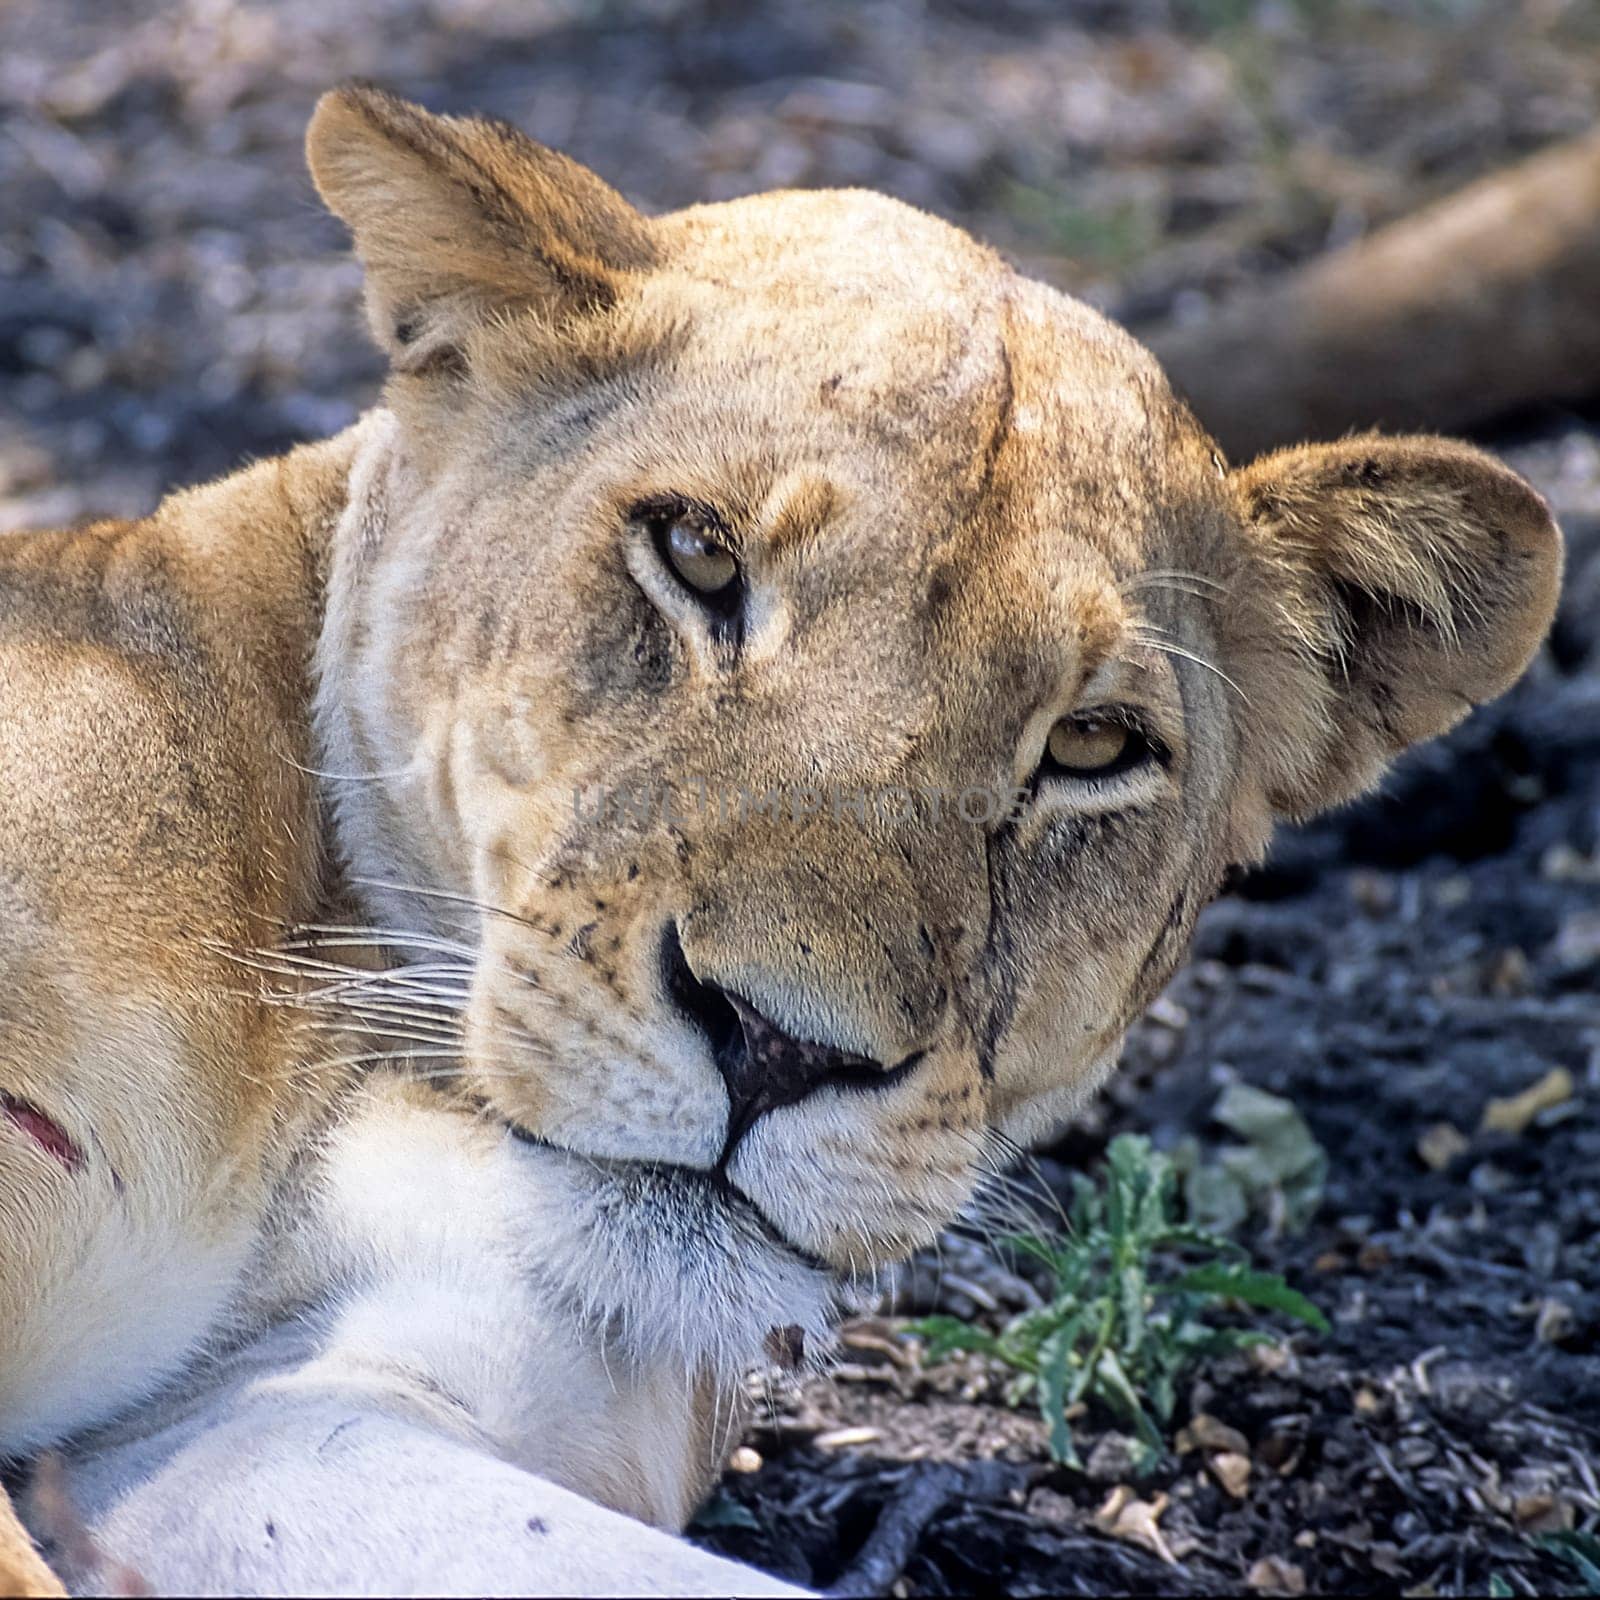 Lion by Giamplume